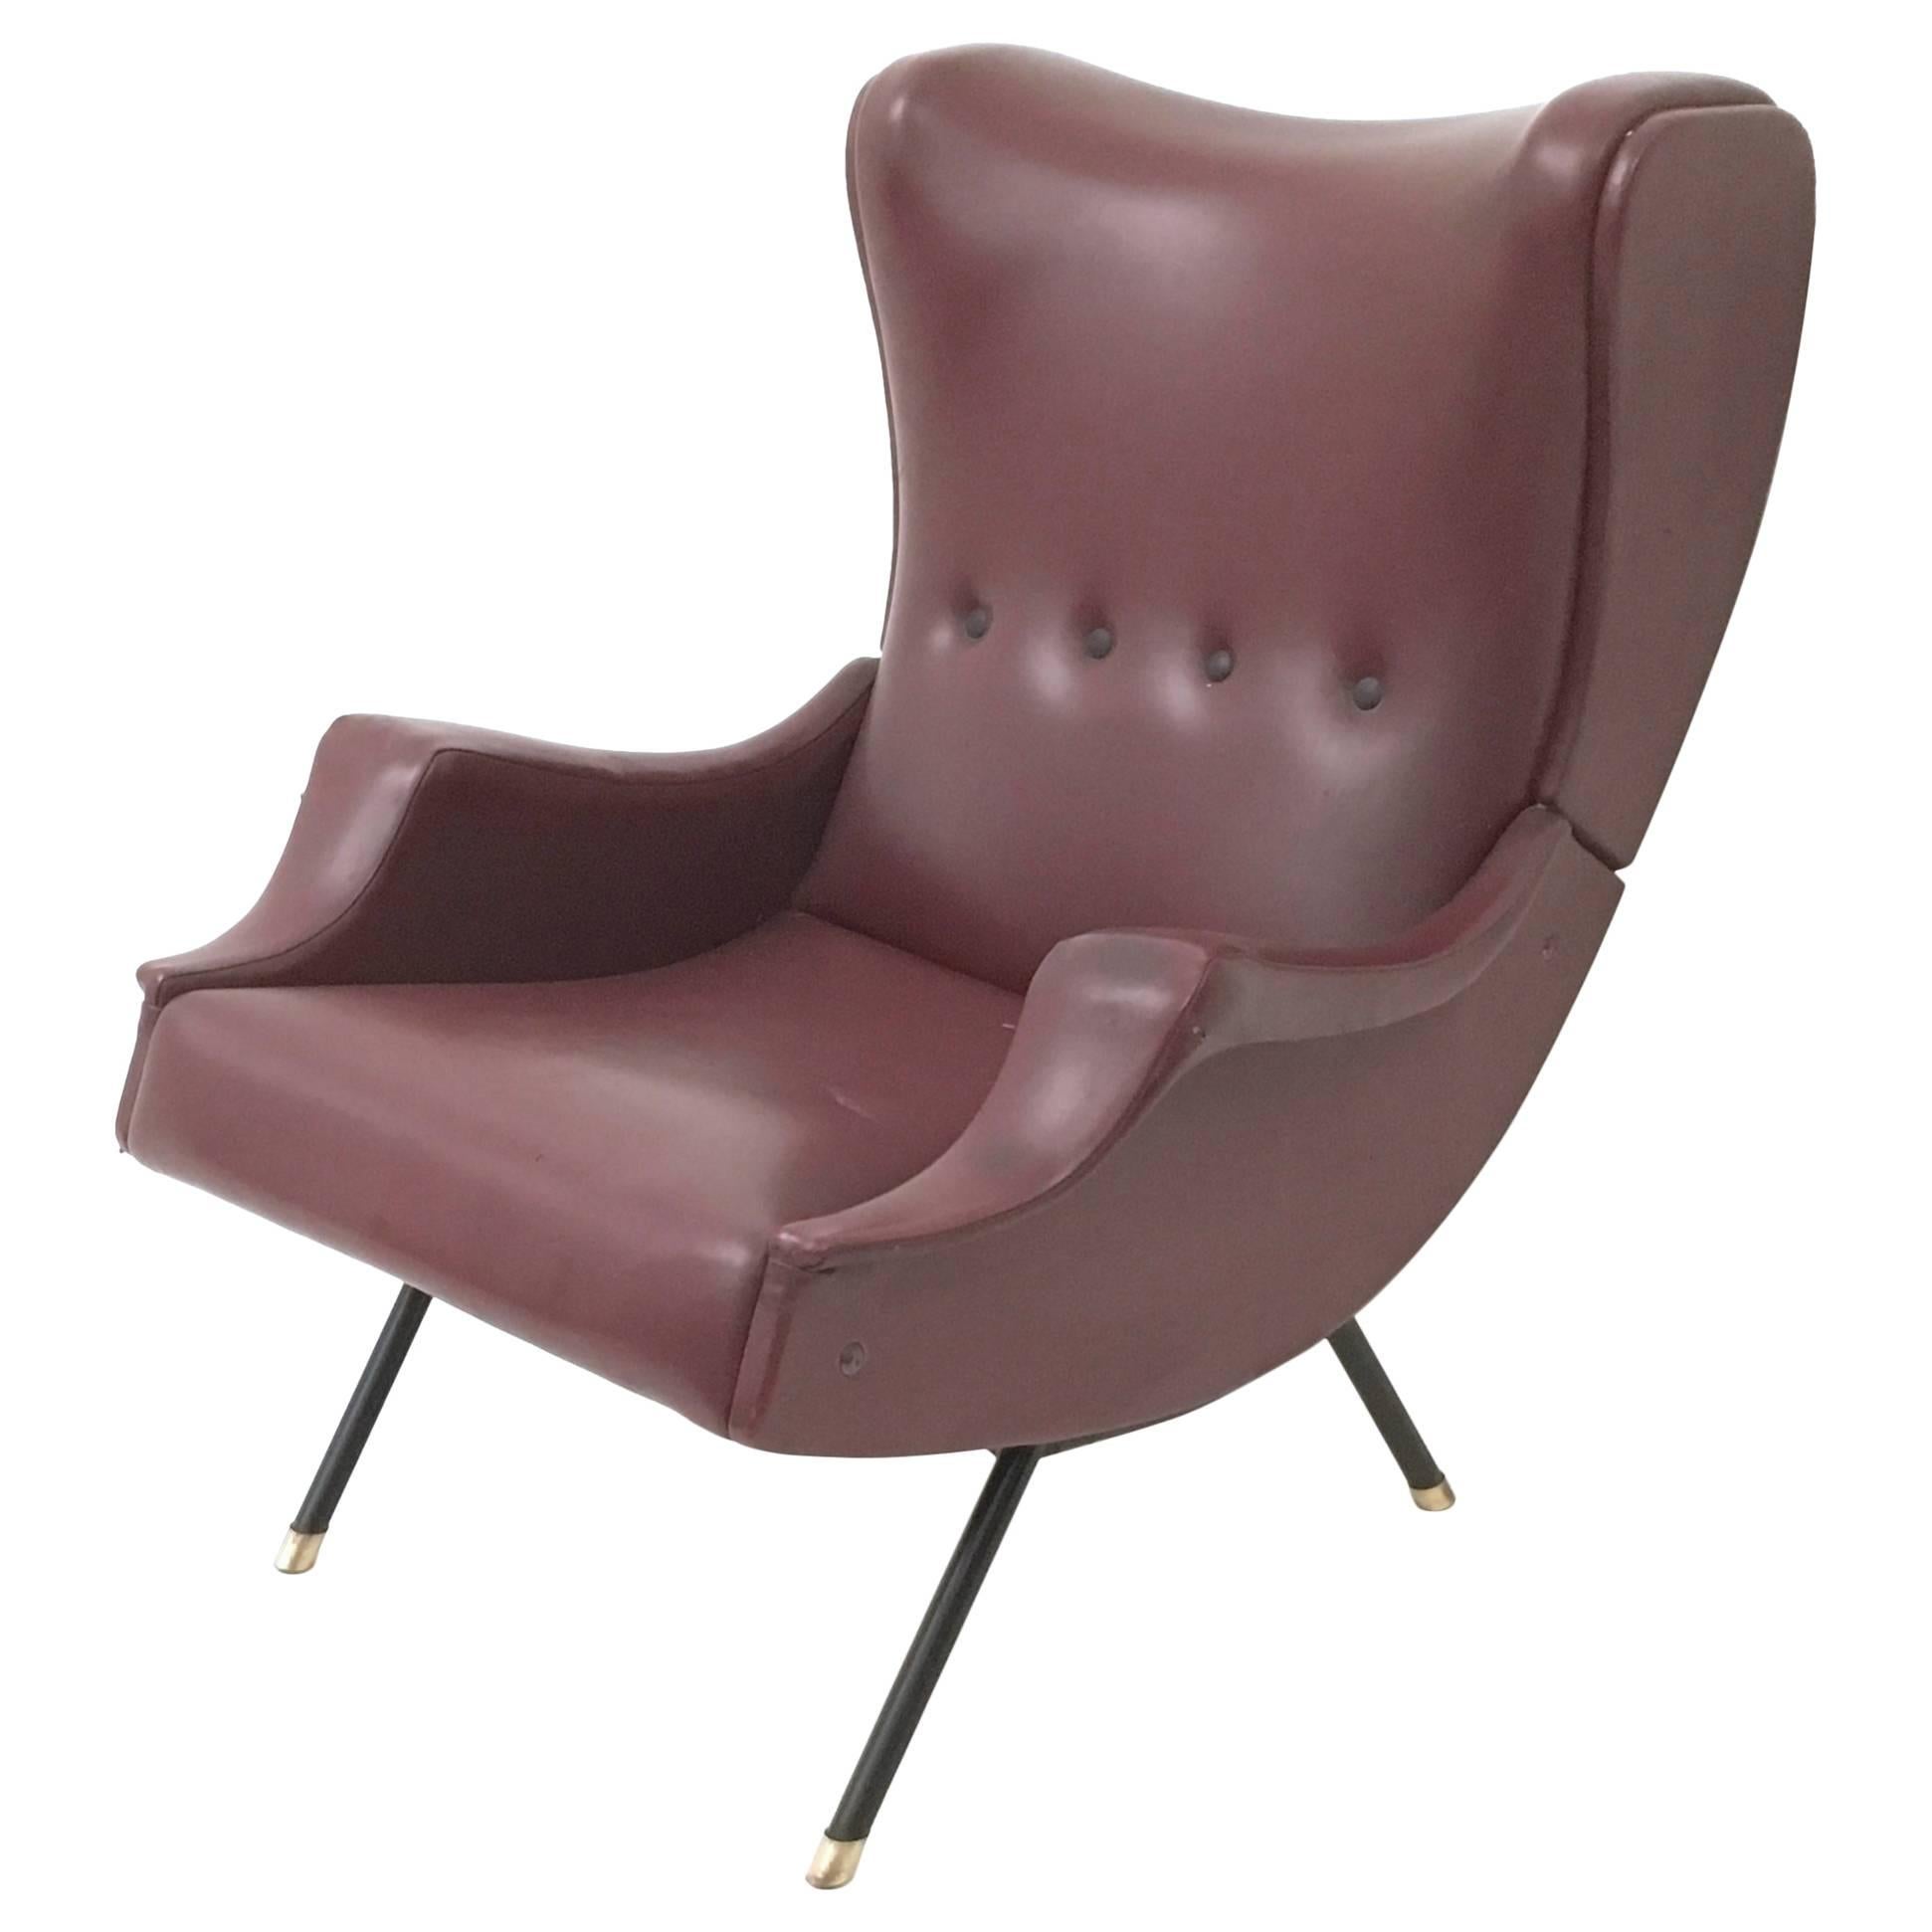 Made in Italy, 1950s.
This lounge chair features a varnished metal frame with brass details and a burgundy skai upholstery.
It is a vintage piece, therefore it might show slight traces of use, but it can be considered as in very good original